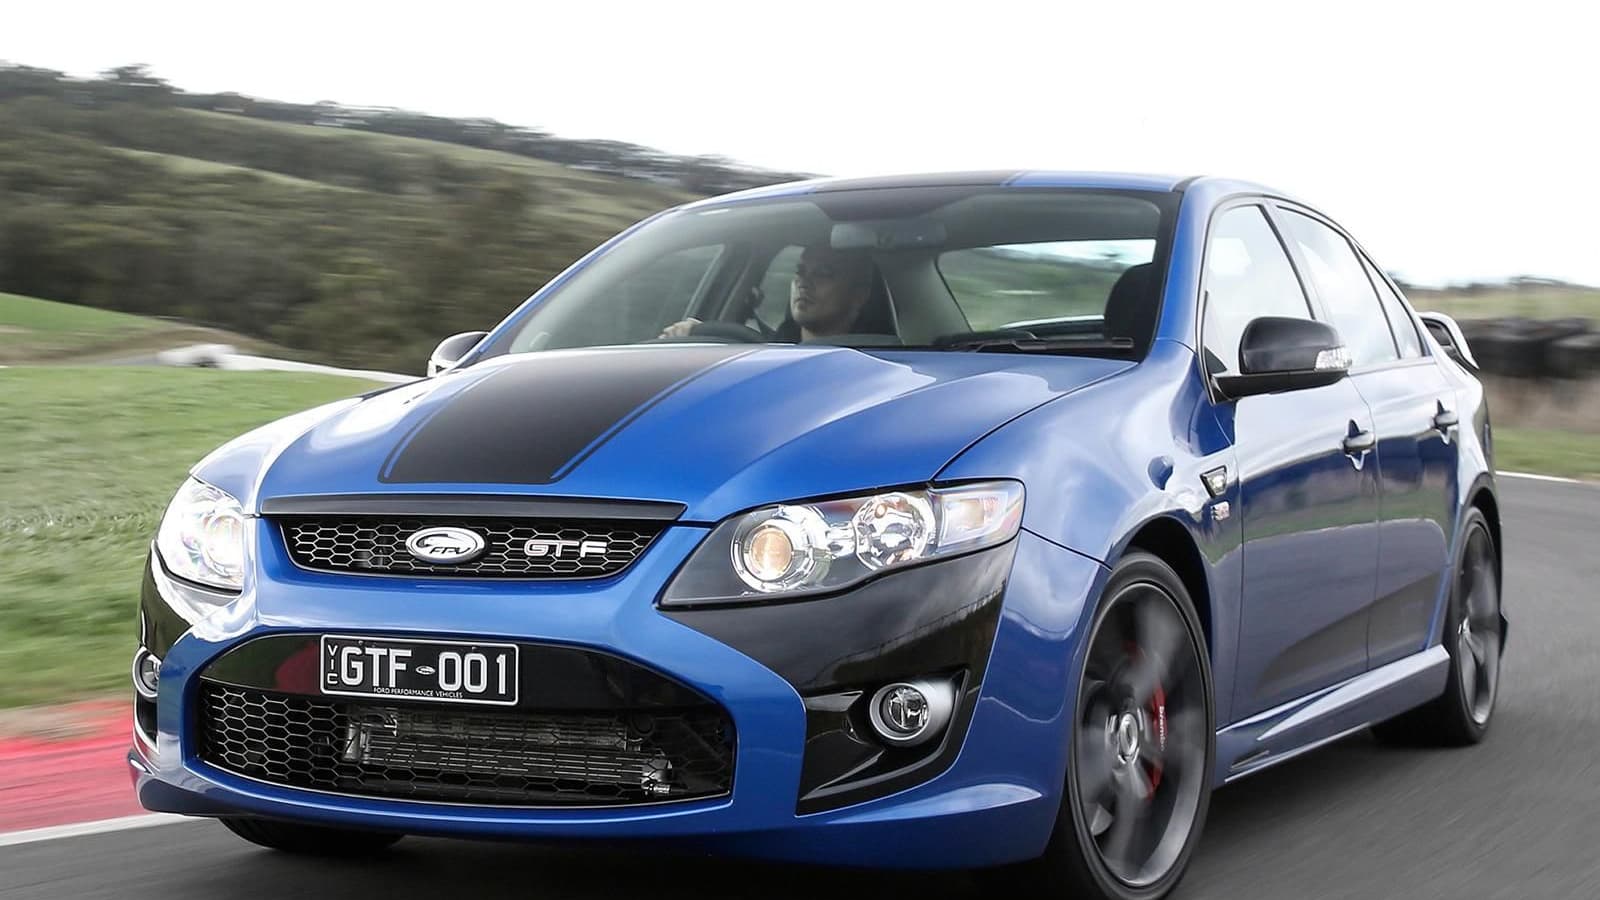 Ford Bids Farewell To Its GT-Badged Falcons With The FPV GT F: Video